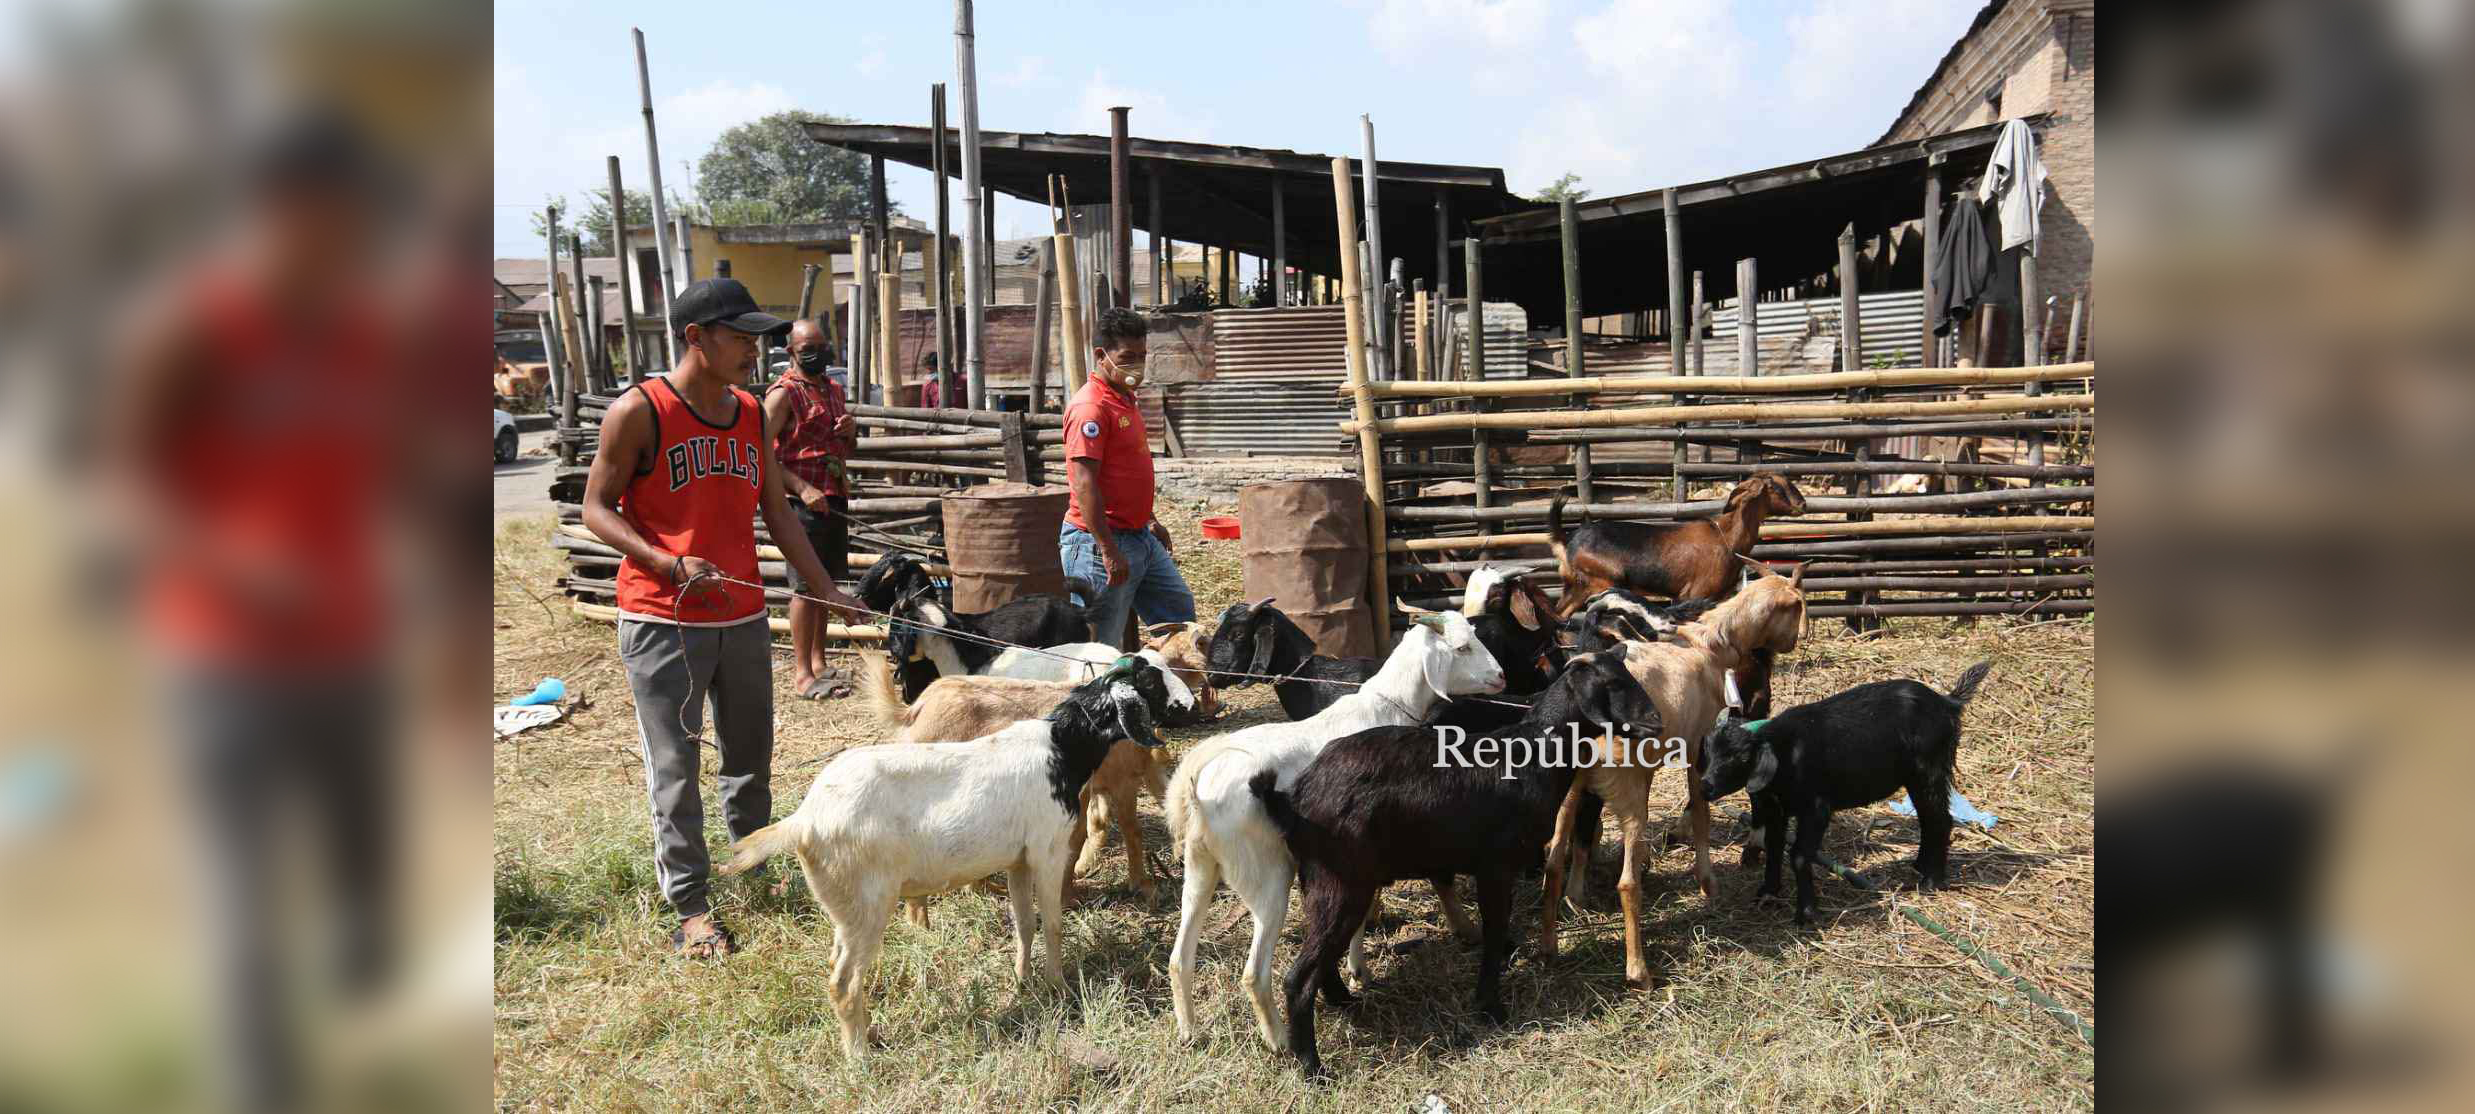 Health examination of goats to be carried out in the Valley from today